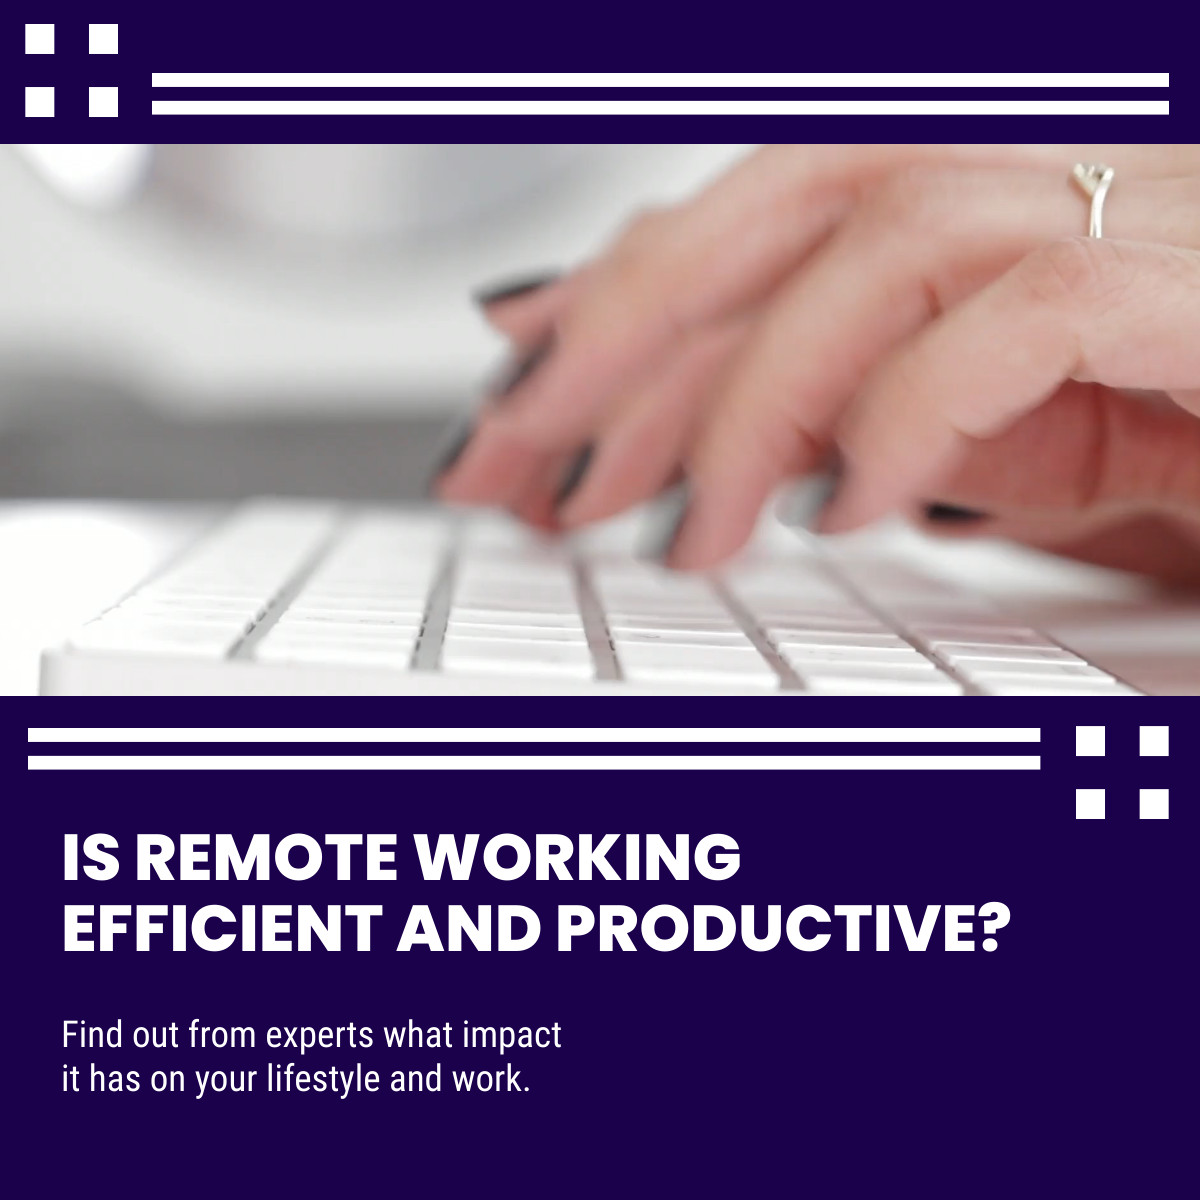 Efficient and Productive Remote Working Video